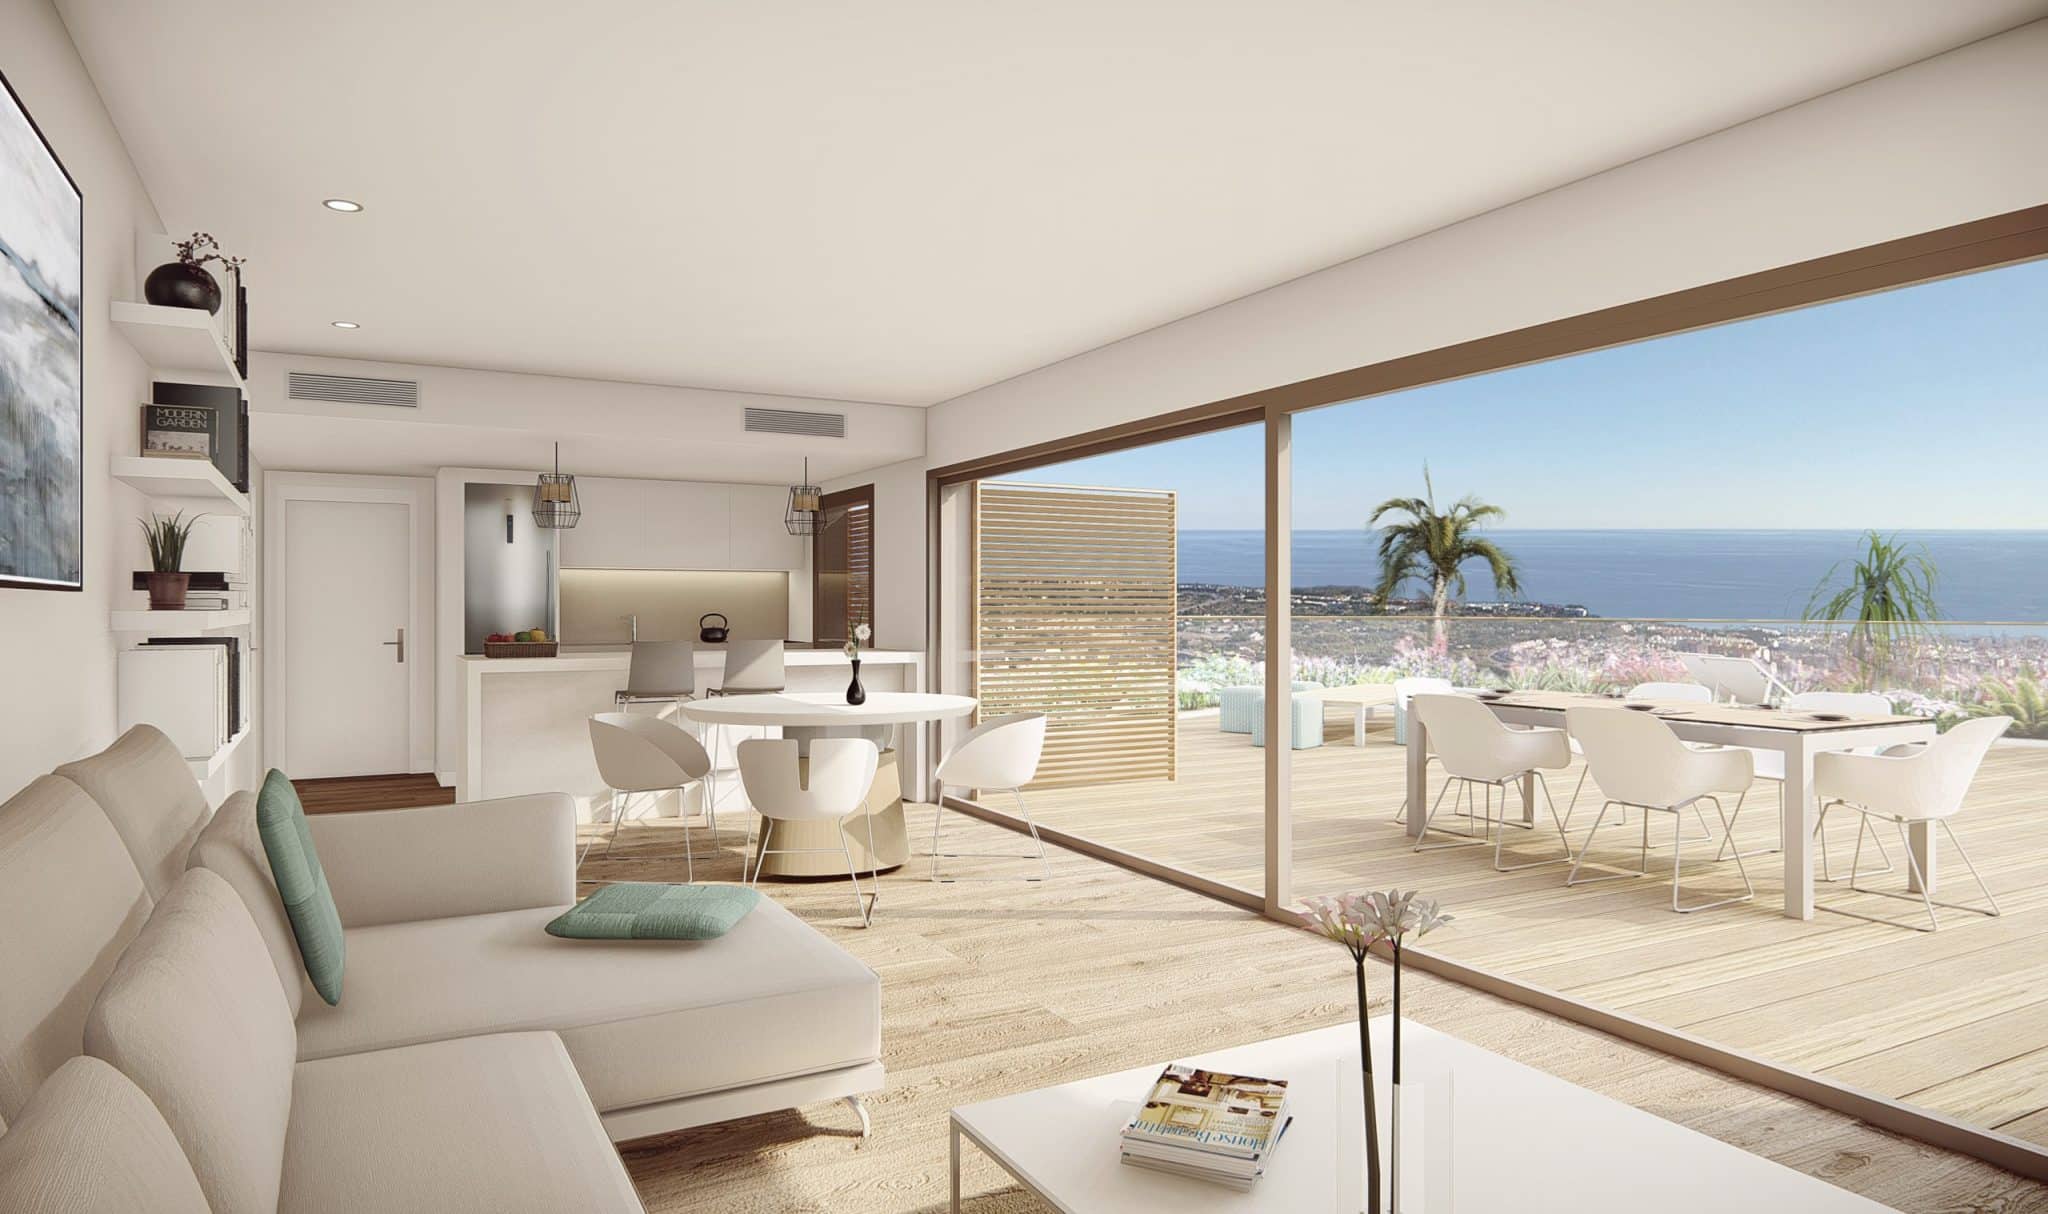 New residence of 70 apartments on plan in Estepona